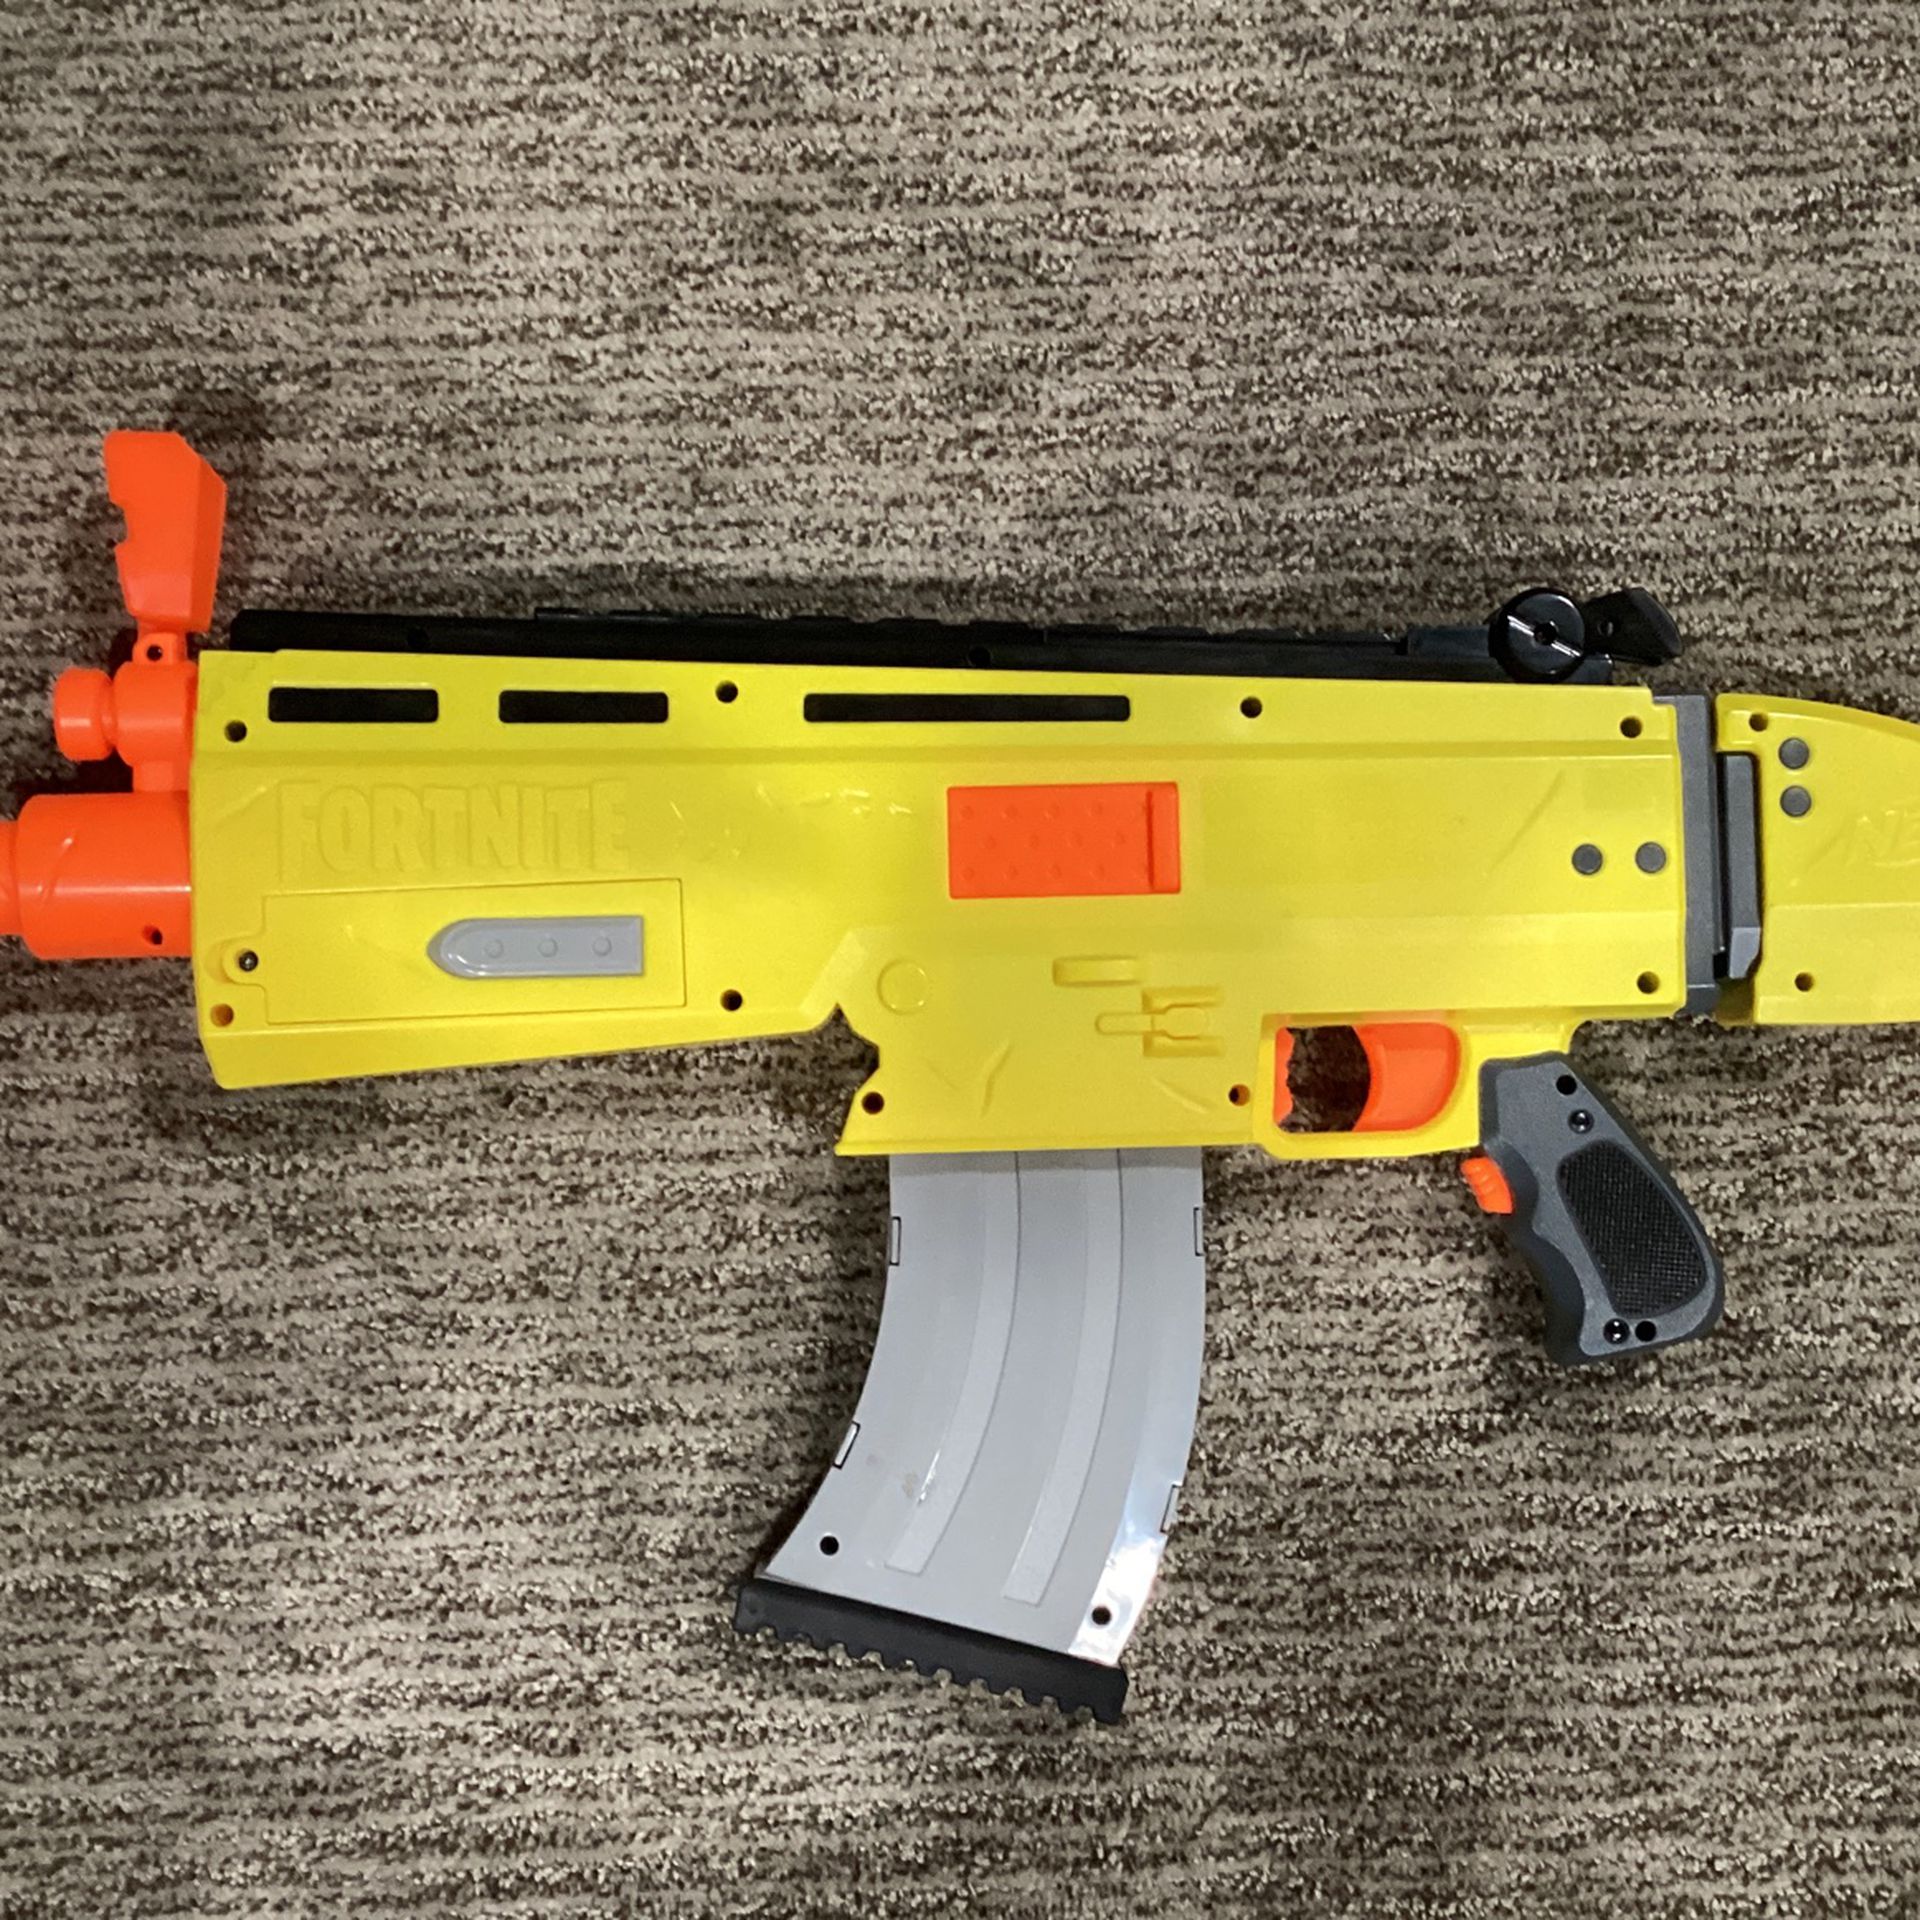 Fortnite Nerf Gun With Max Bullets Full Amo Batteries Included NEGOTIATABLE 